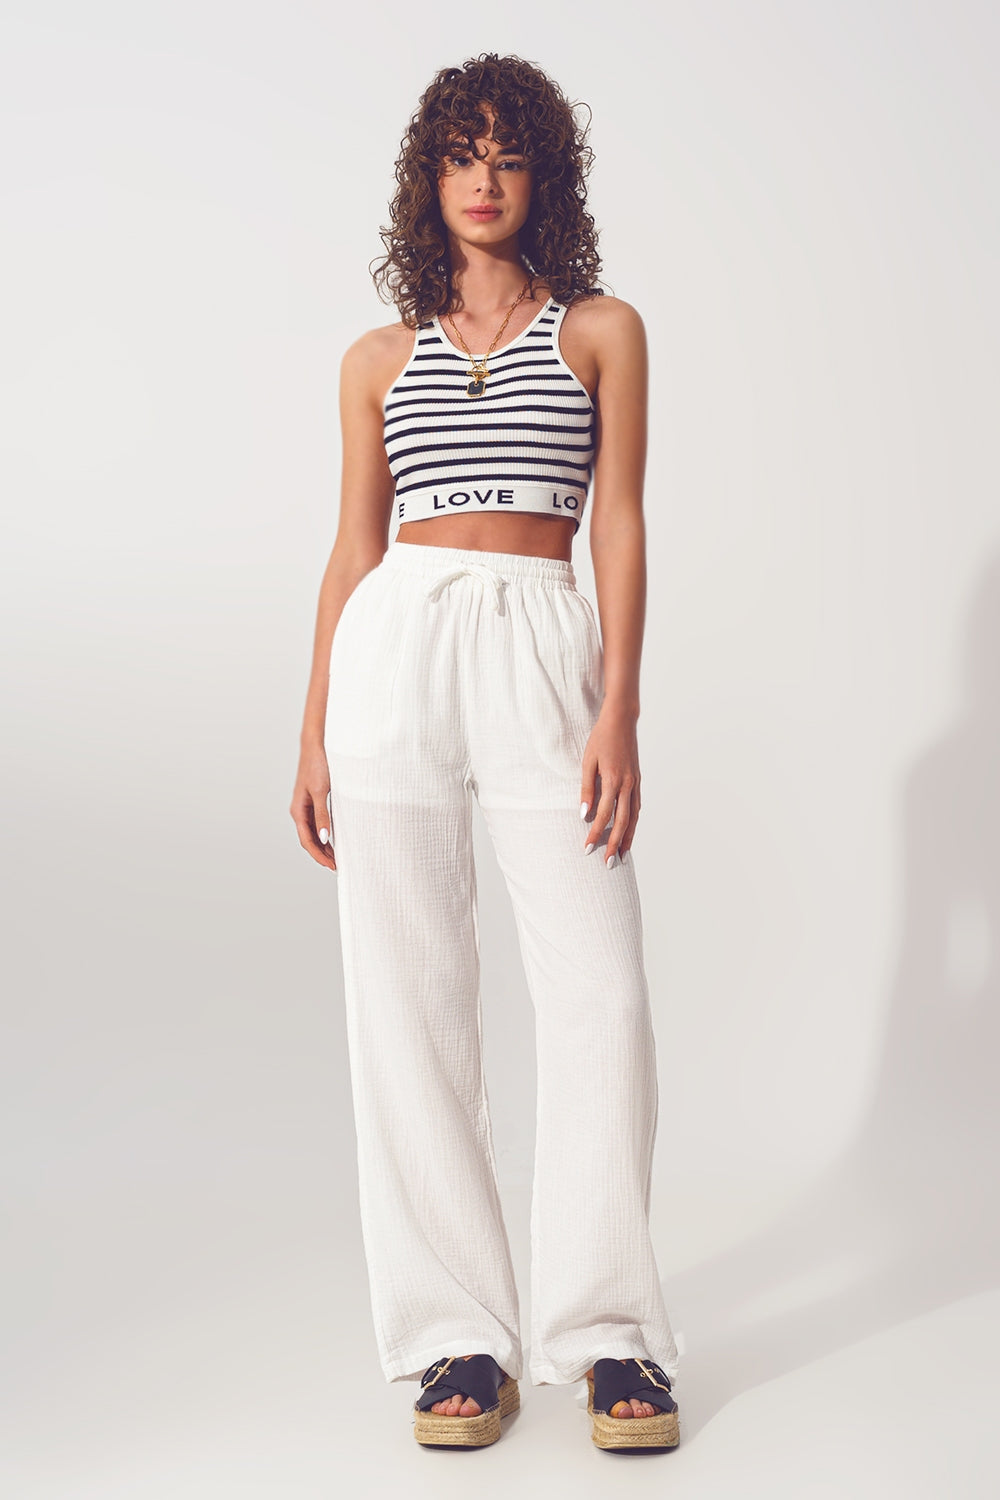 Striped Cropped Top with Love Text in White - Szua Store